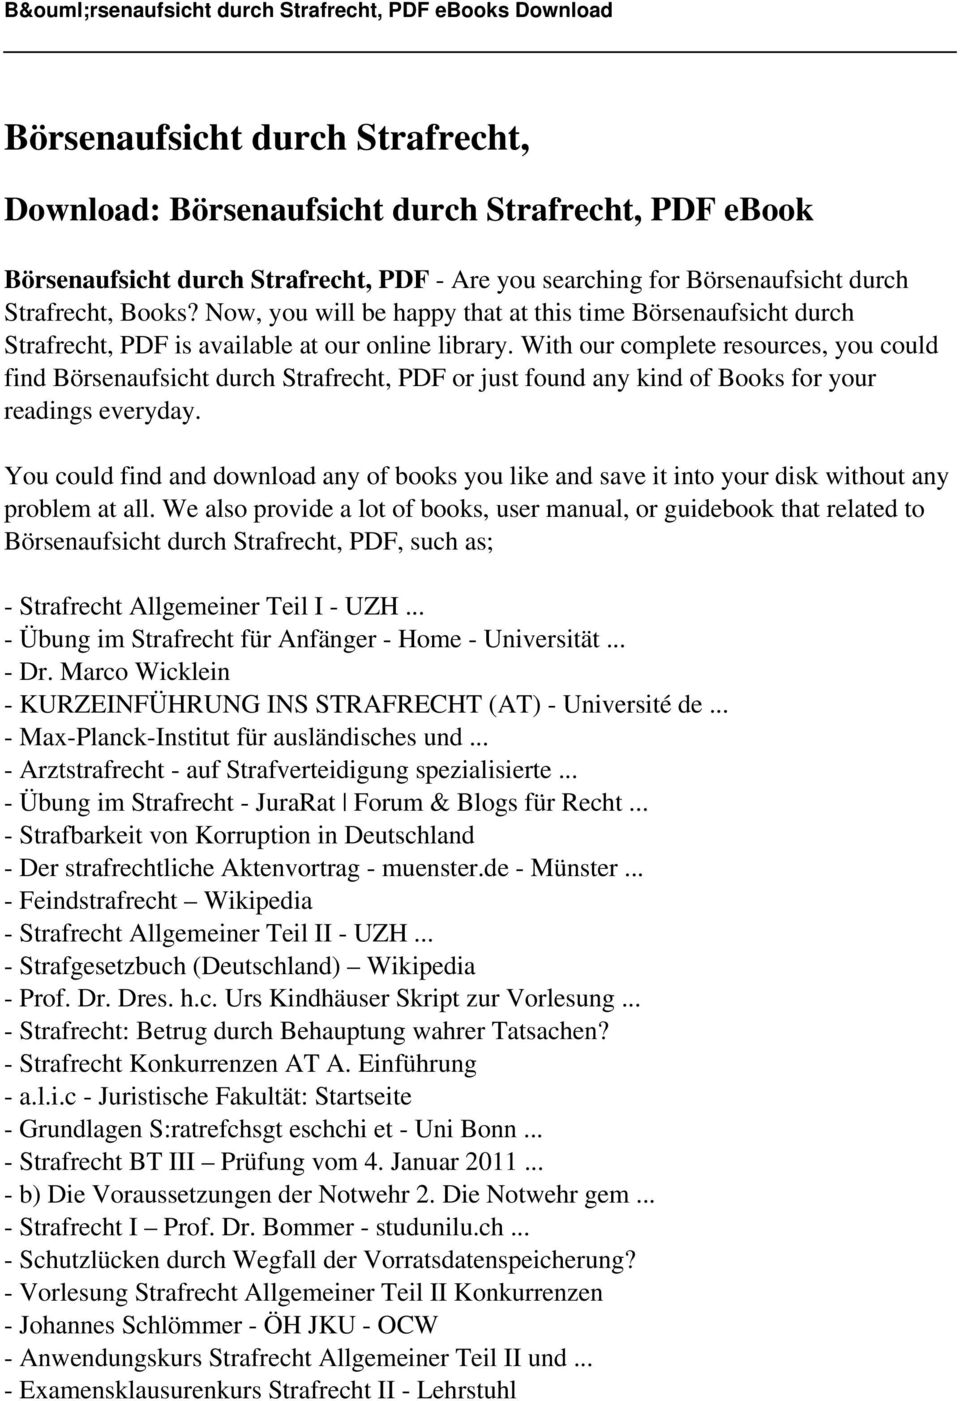 With our complete resources, you could find Börsenaufsicht durch Strafrecht, PDF or just found any kind of Books for your readings everyday.